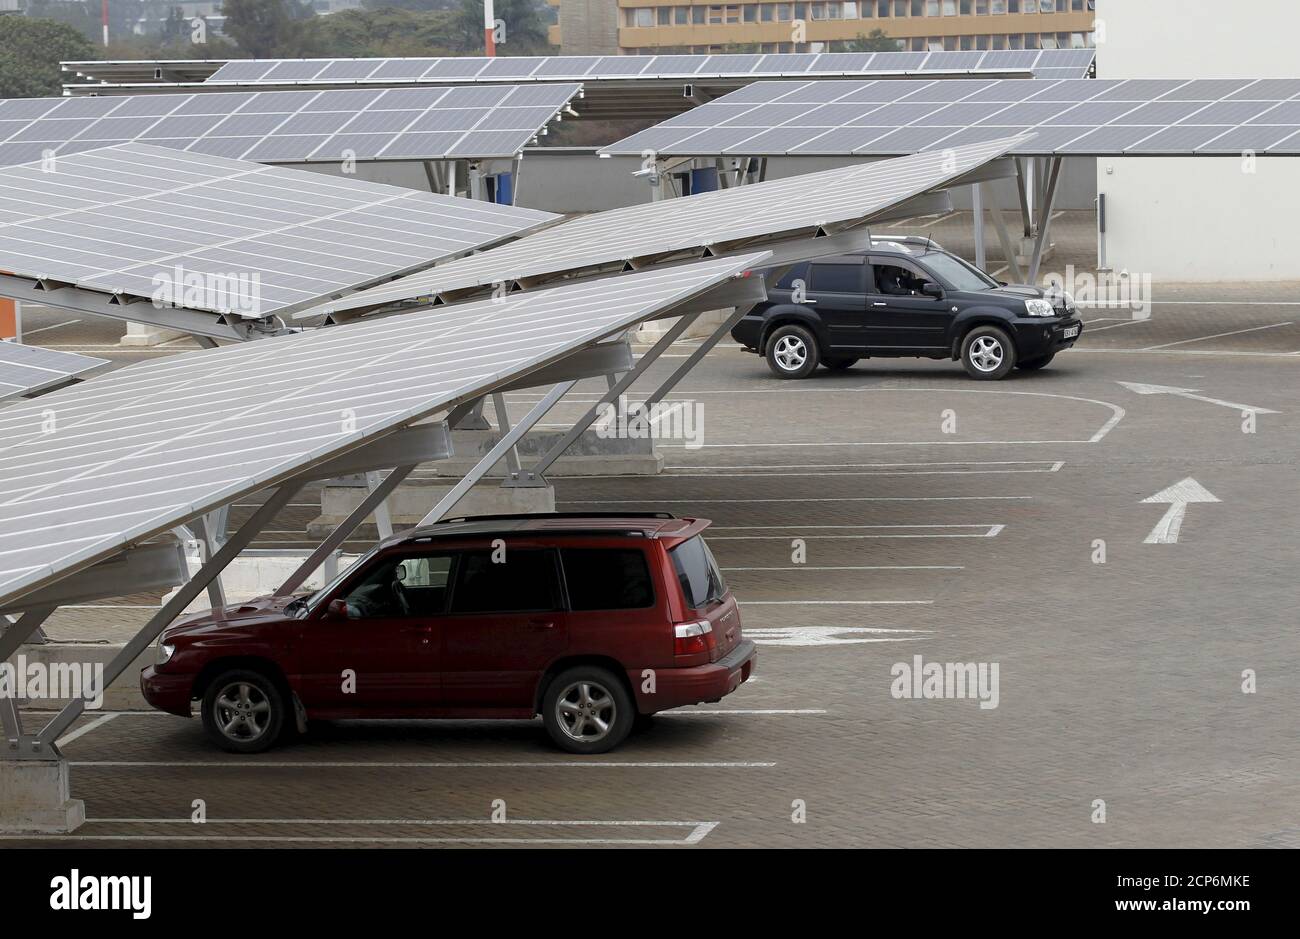 A car is seen parked under solar panels at a solar carport at the Garden City shopping mall in Kenya's capital Nairobi, September 15, 2015. The Africa's largest solar carport with 3,300 solar panels will generate 1256 MWh annually and cut carbon emission by around 745 tonnes per year, according to Solarcentury and Solar Africa.  REUTERS/Thomas Mukoya Stock Photo